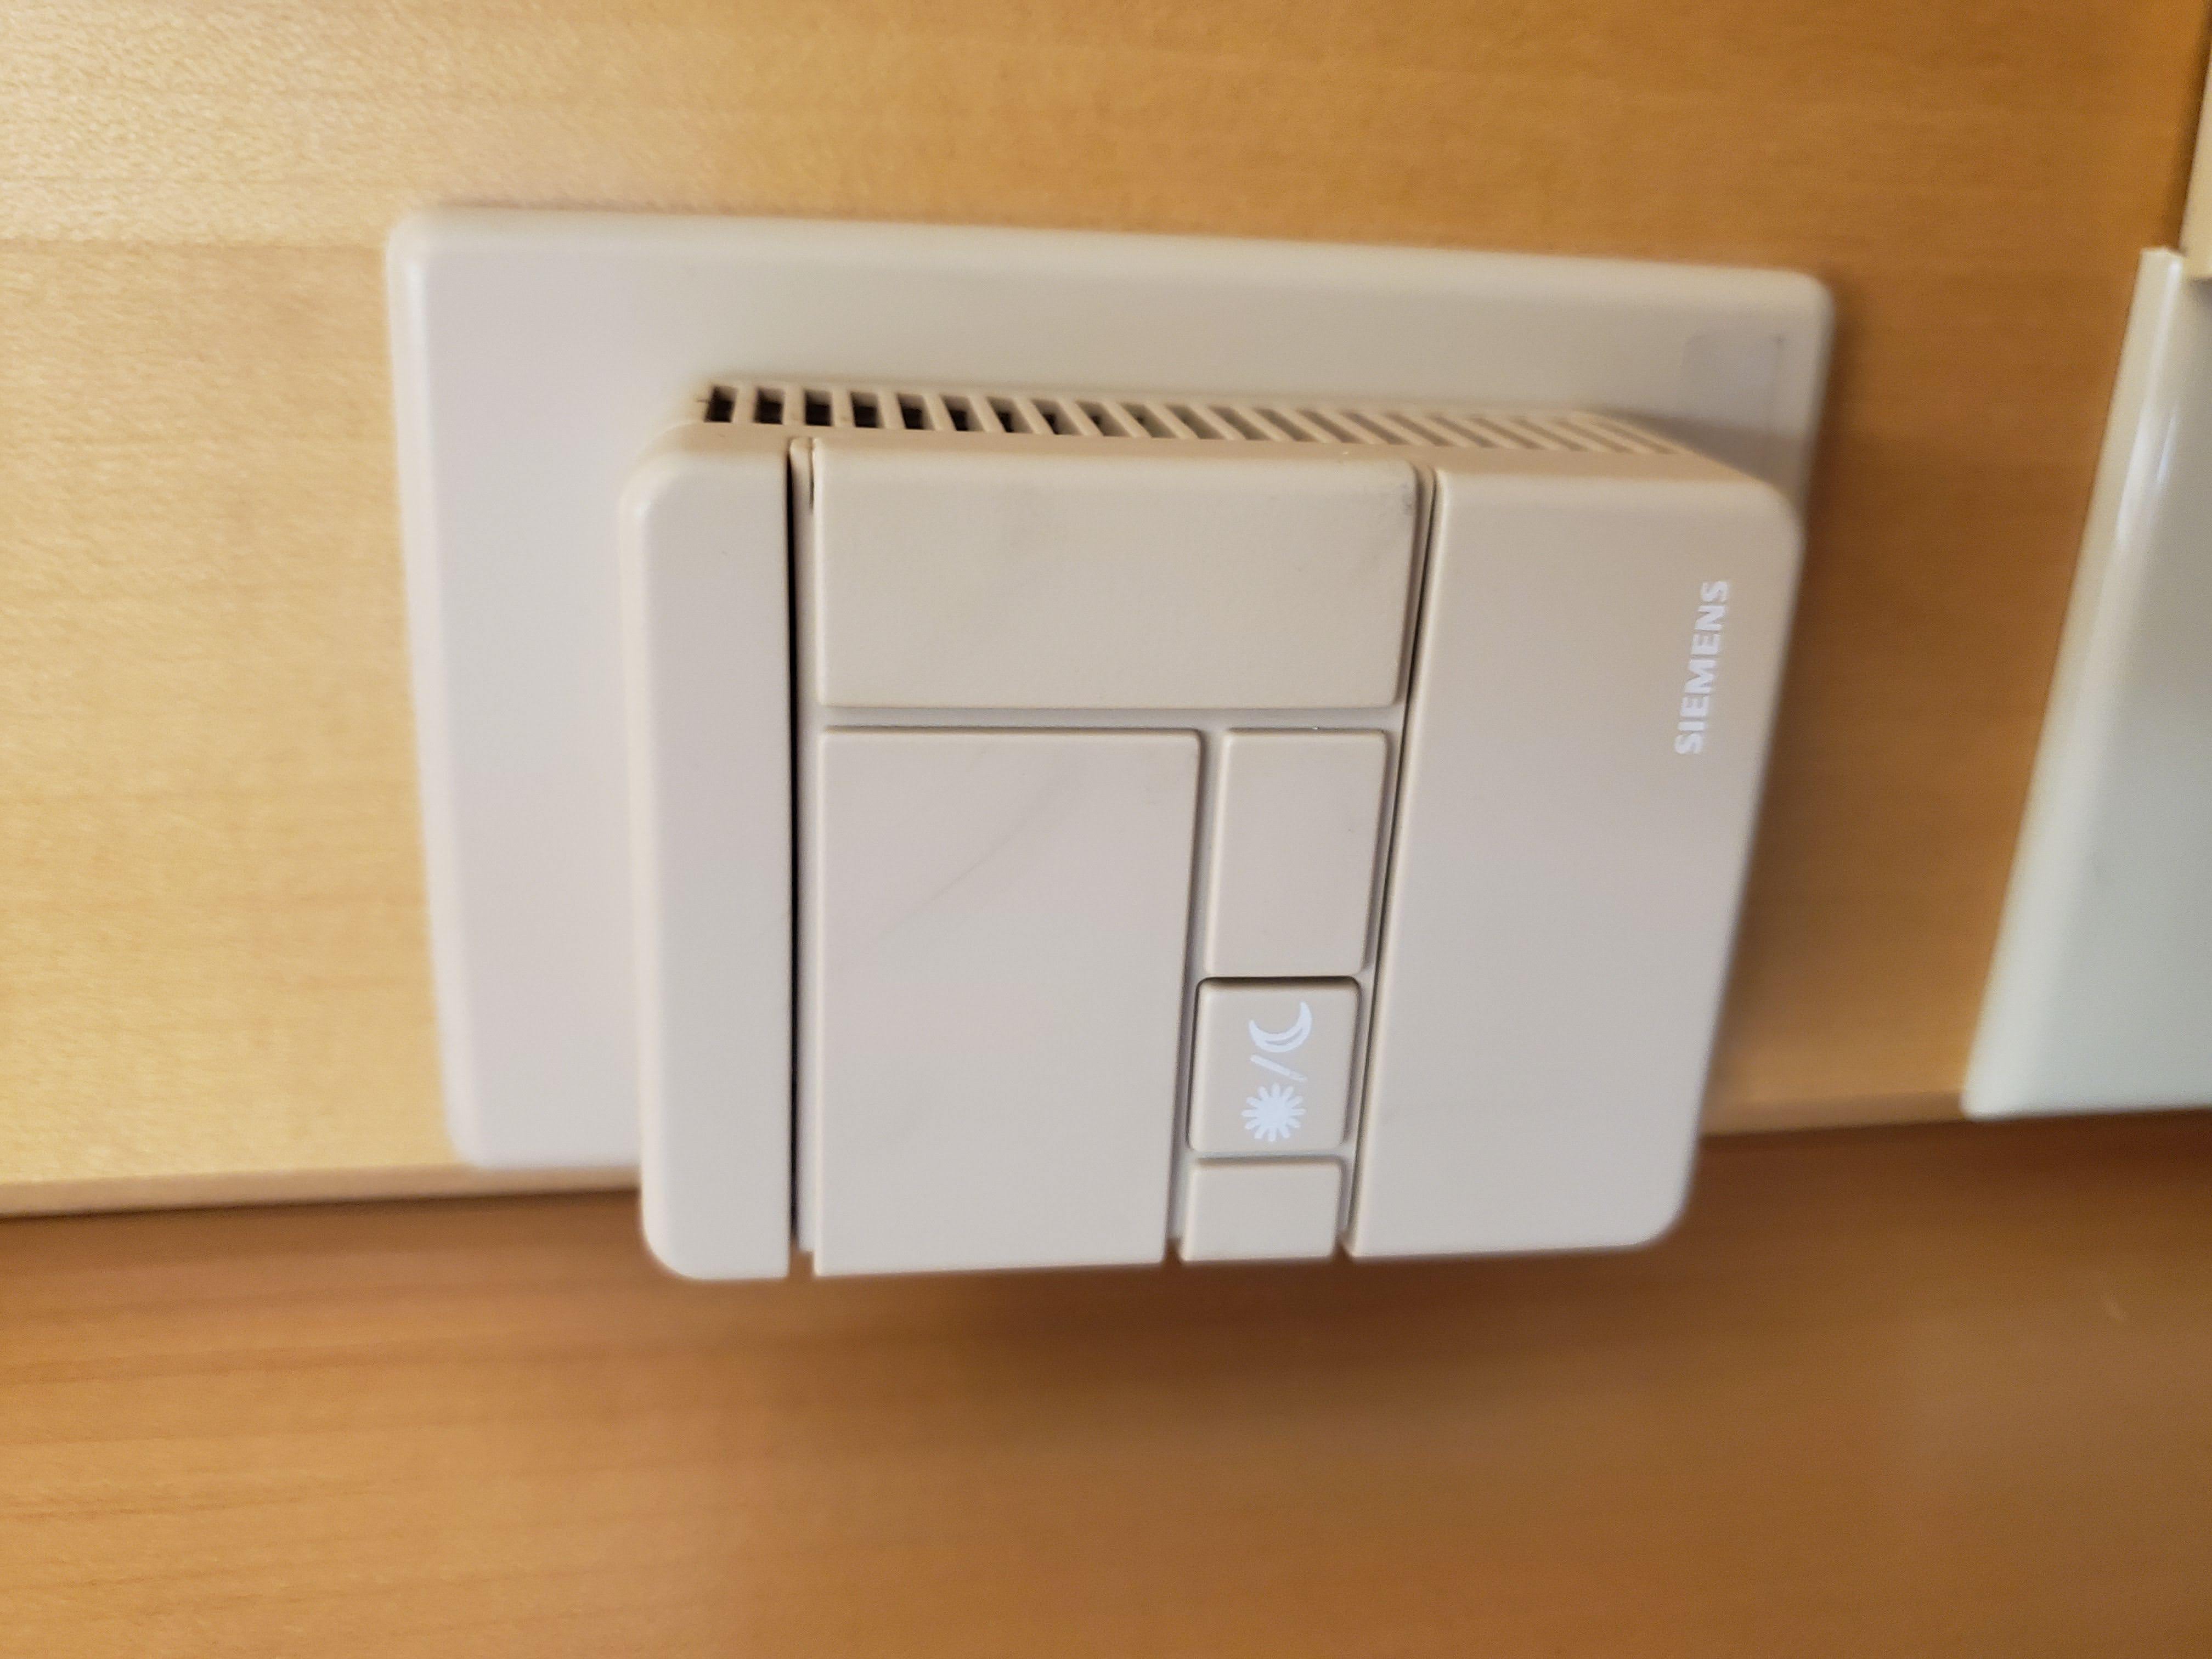 siemens thermostat that is not adjustable